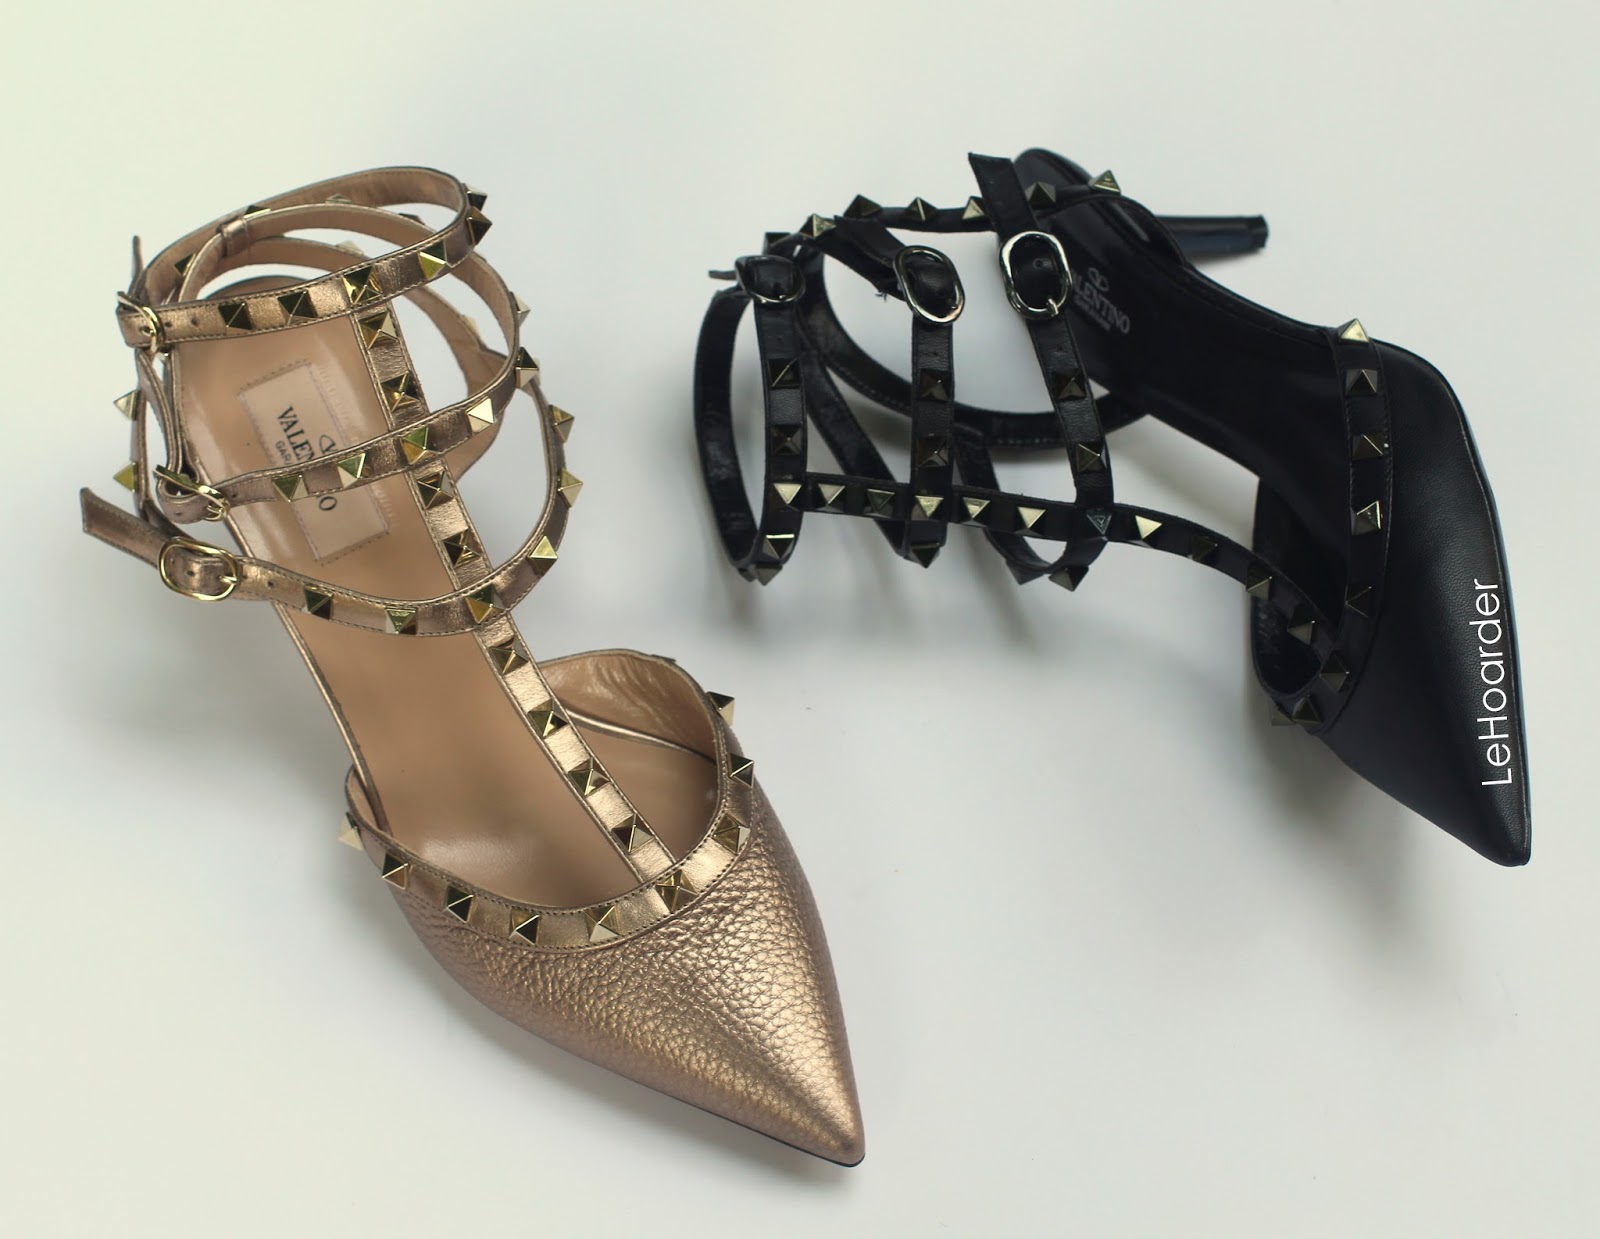 Michelle and her very Valentino day (ROCKSTUDS!!!!) | Le Hoarder